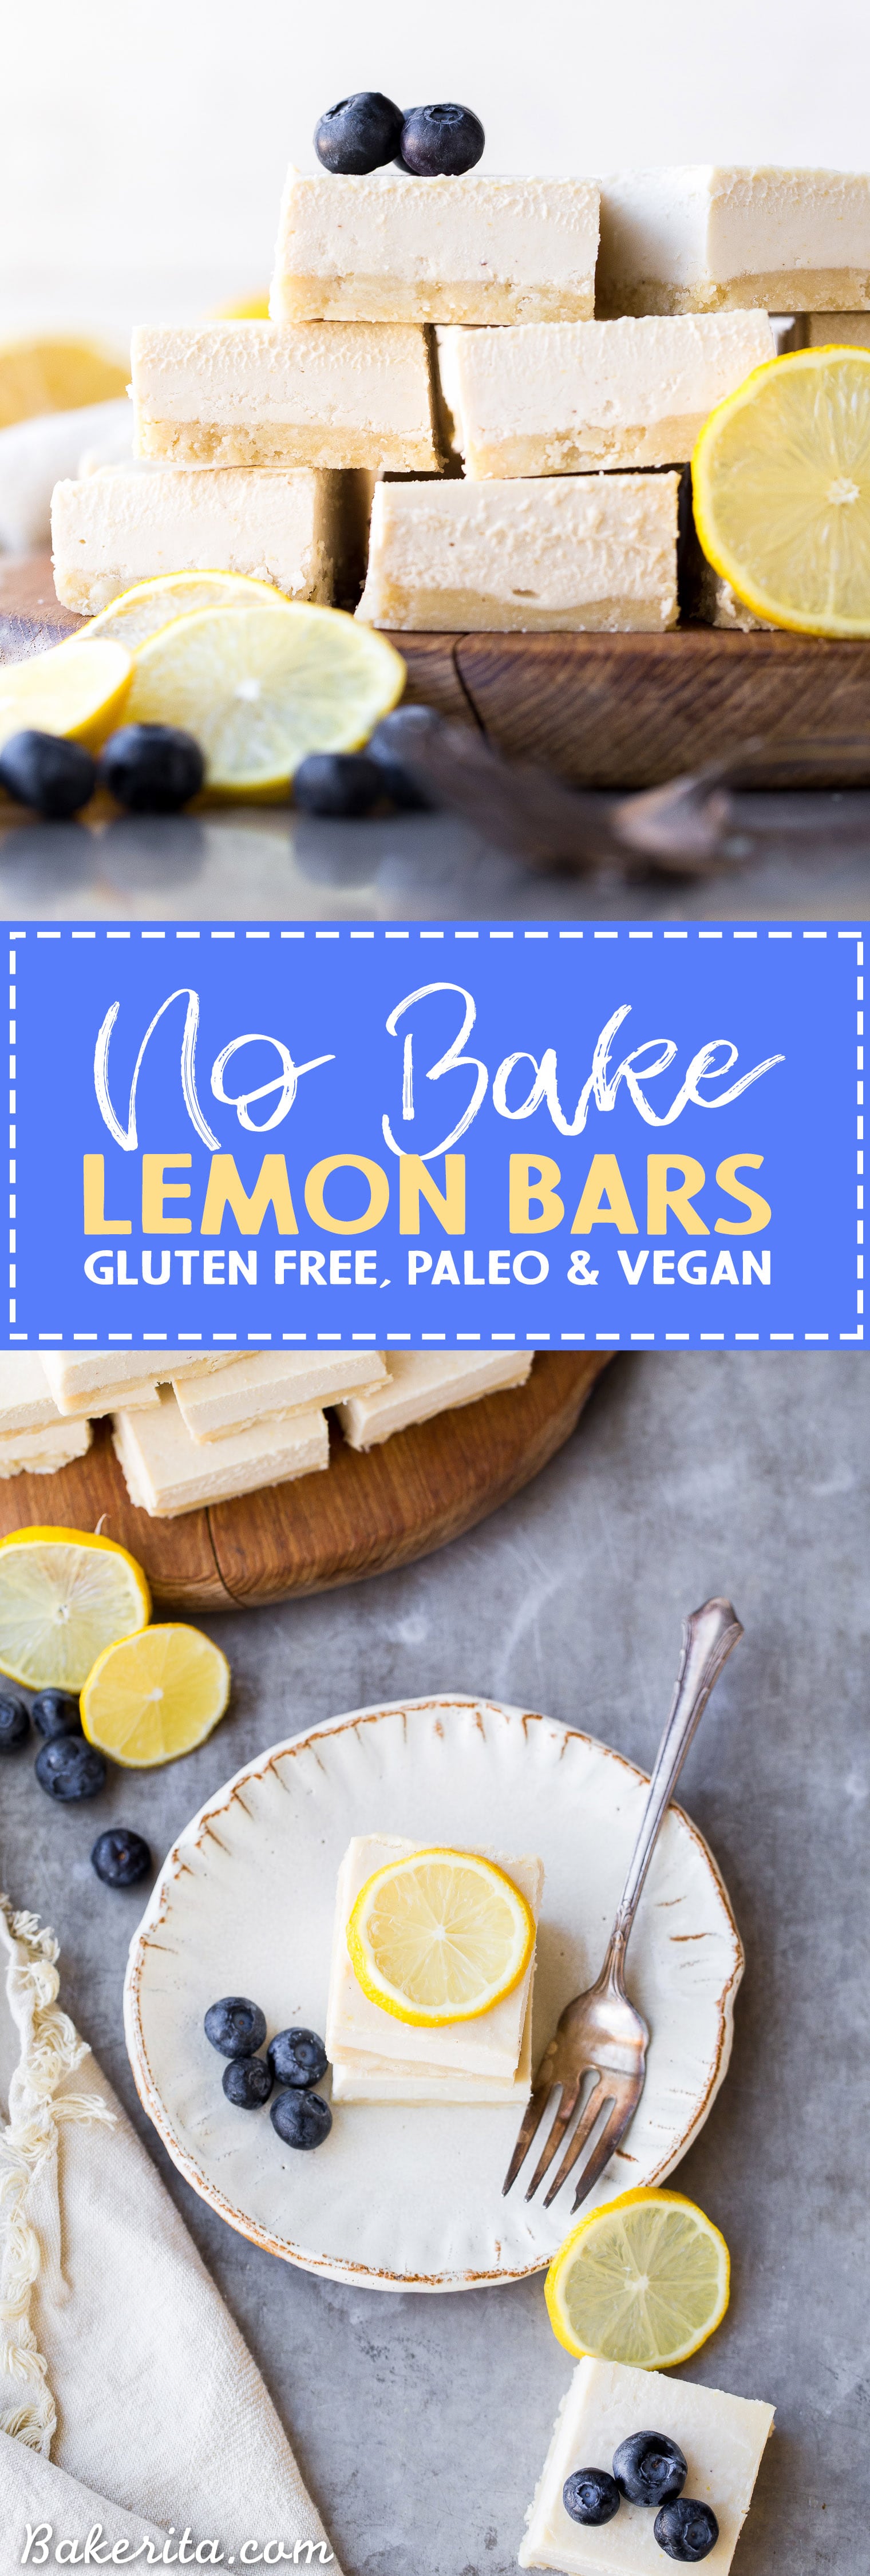 These No Bake Lemon Bars are incredibly smooth and creamy with a bright and tart lemon flavor. These gluten-free, paleo and vegan lemon bars come together quickly and easily in a blender.